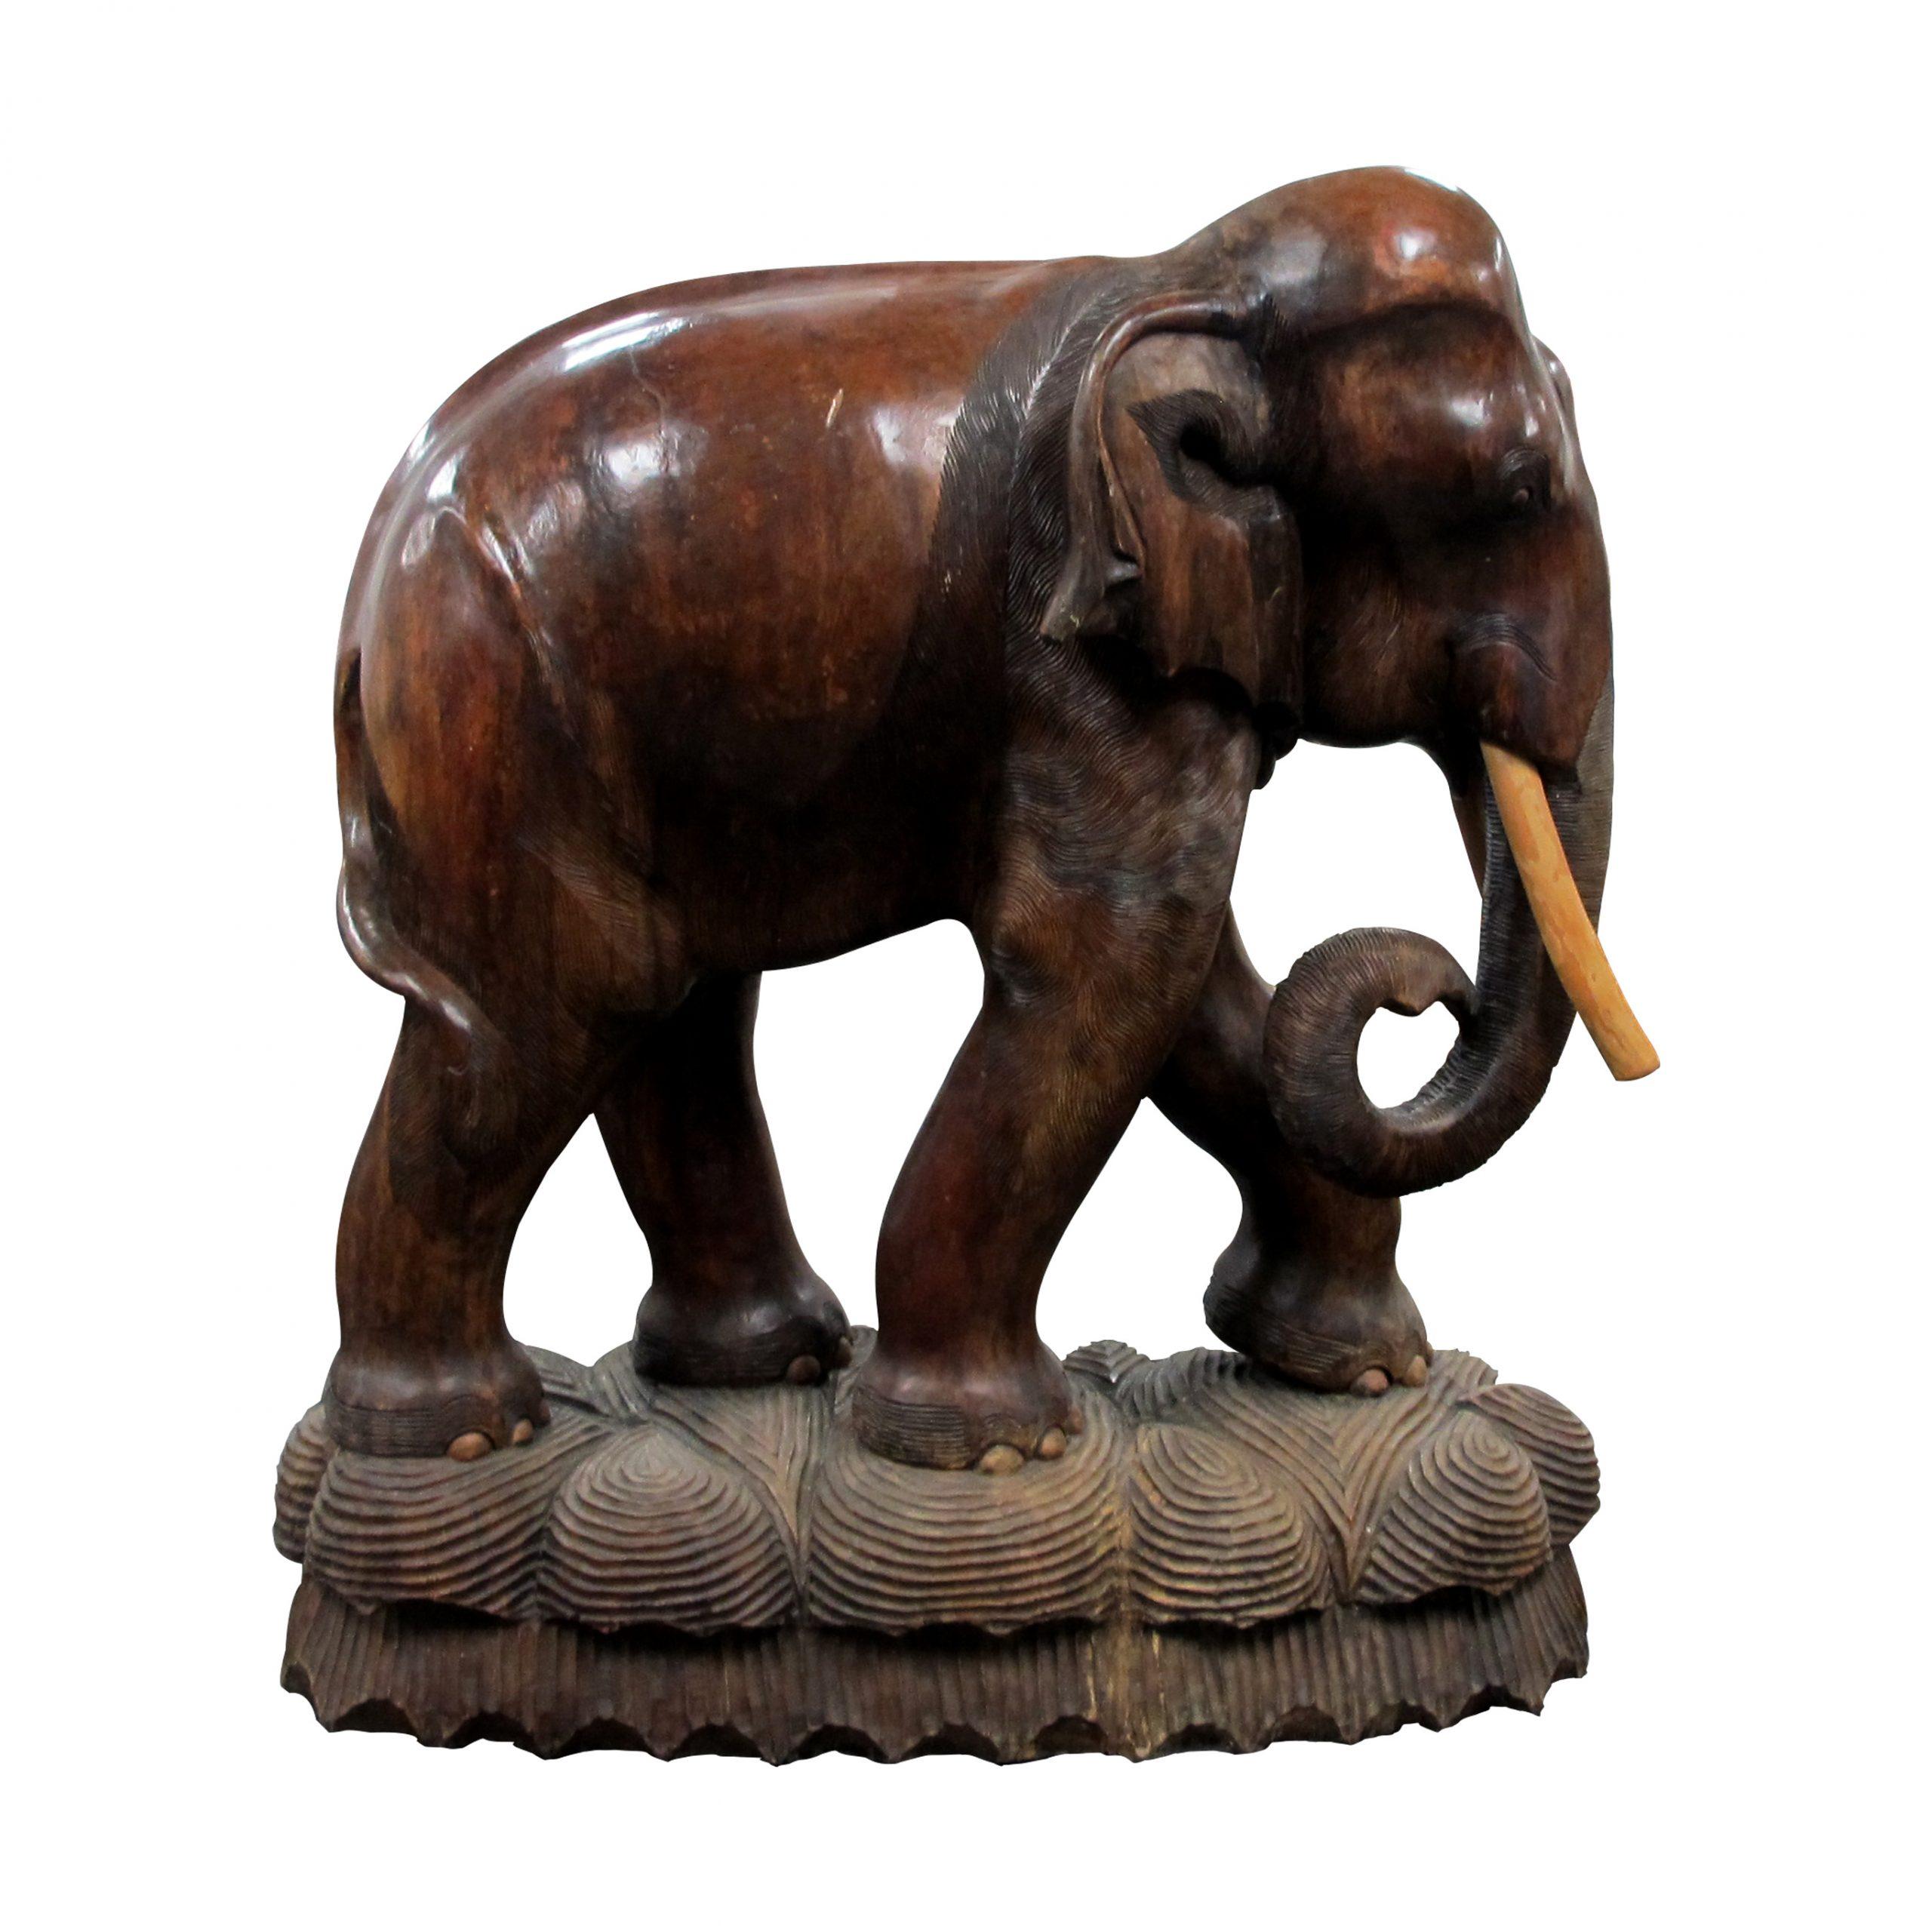 Mid-Century Modern Decorative Large Pair of Carved Wood Elephants Sculptures, 20th century For Sale